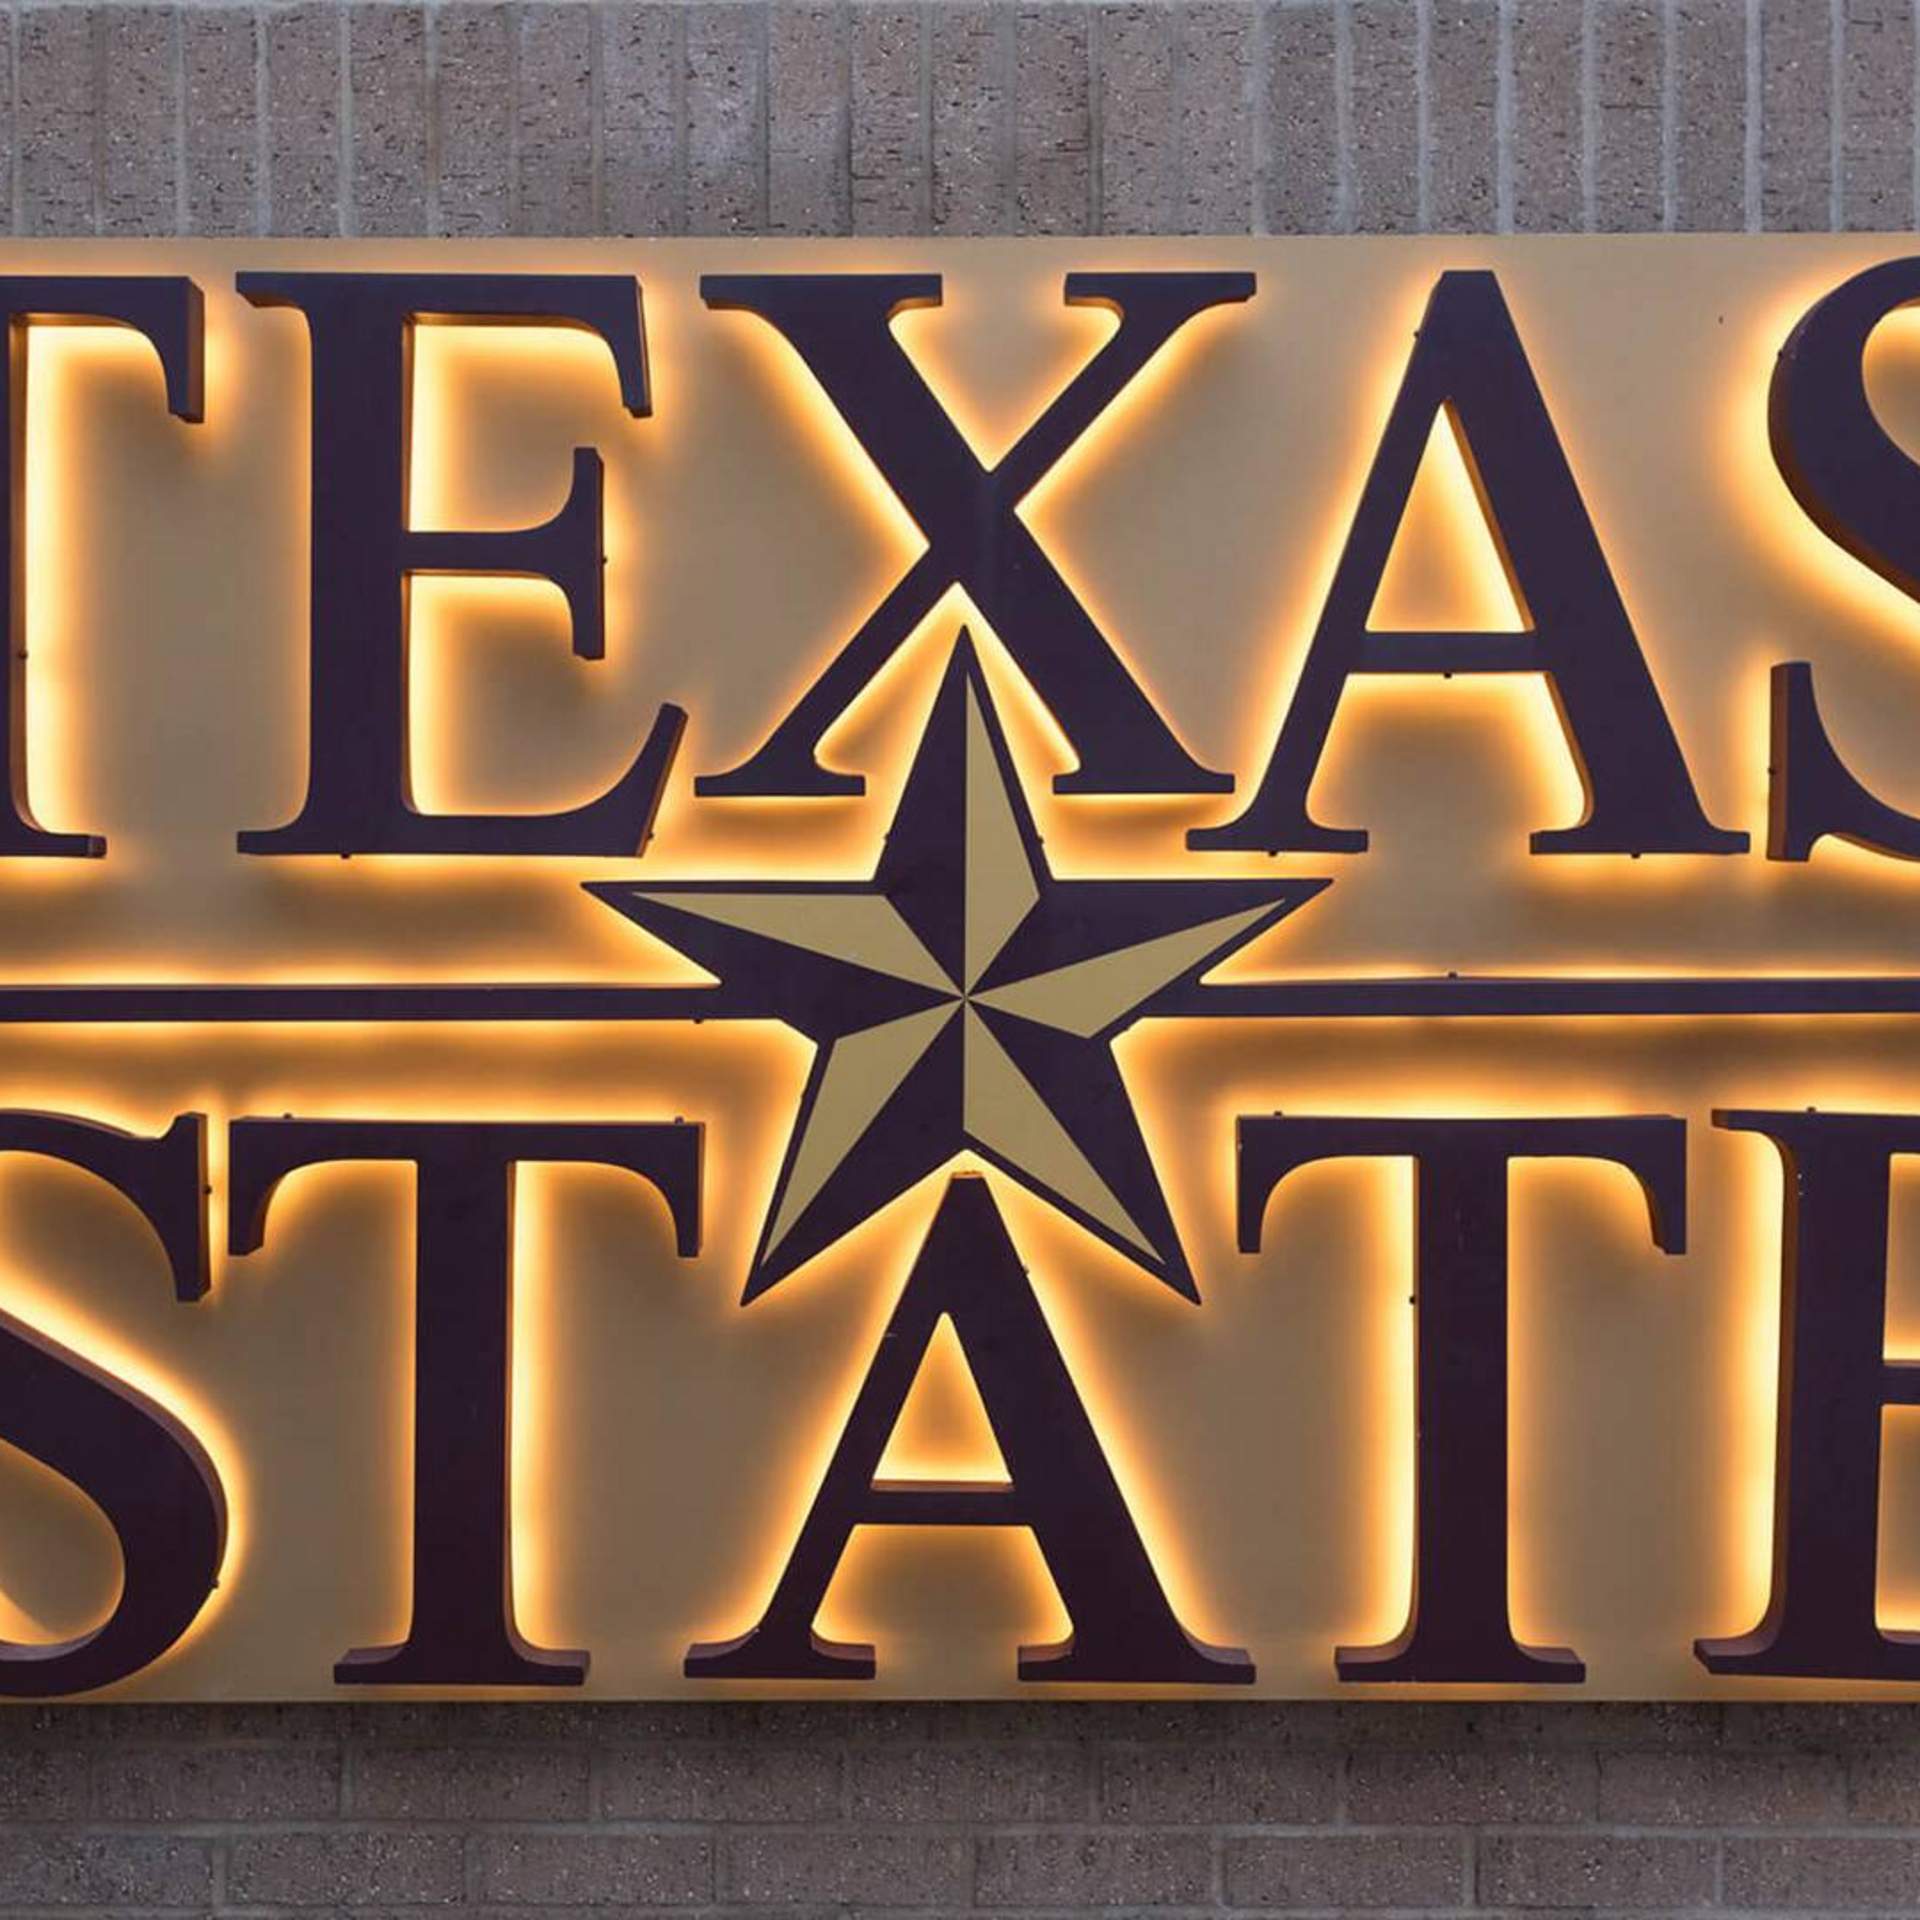 TXST sign